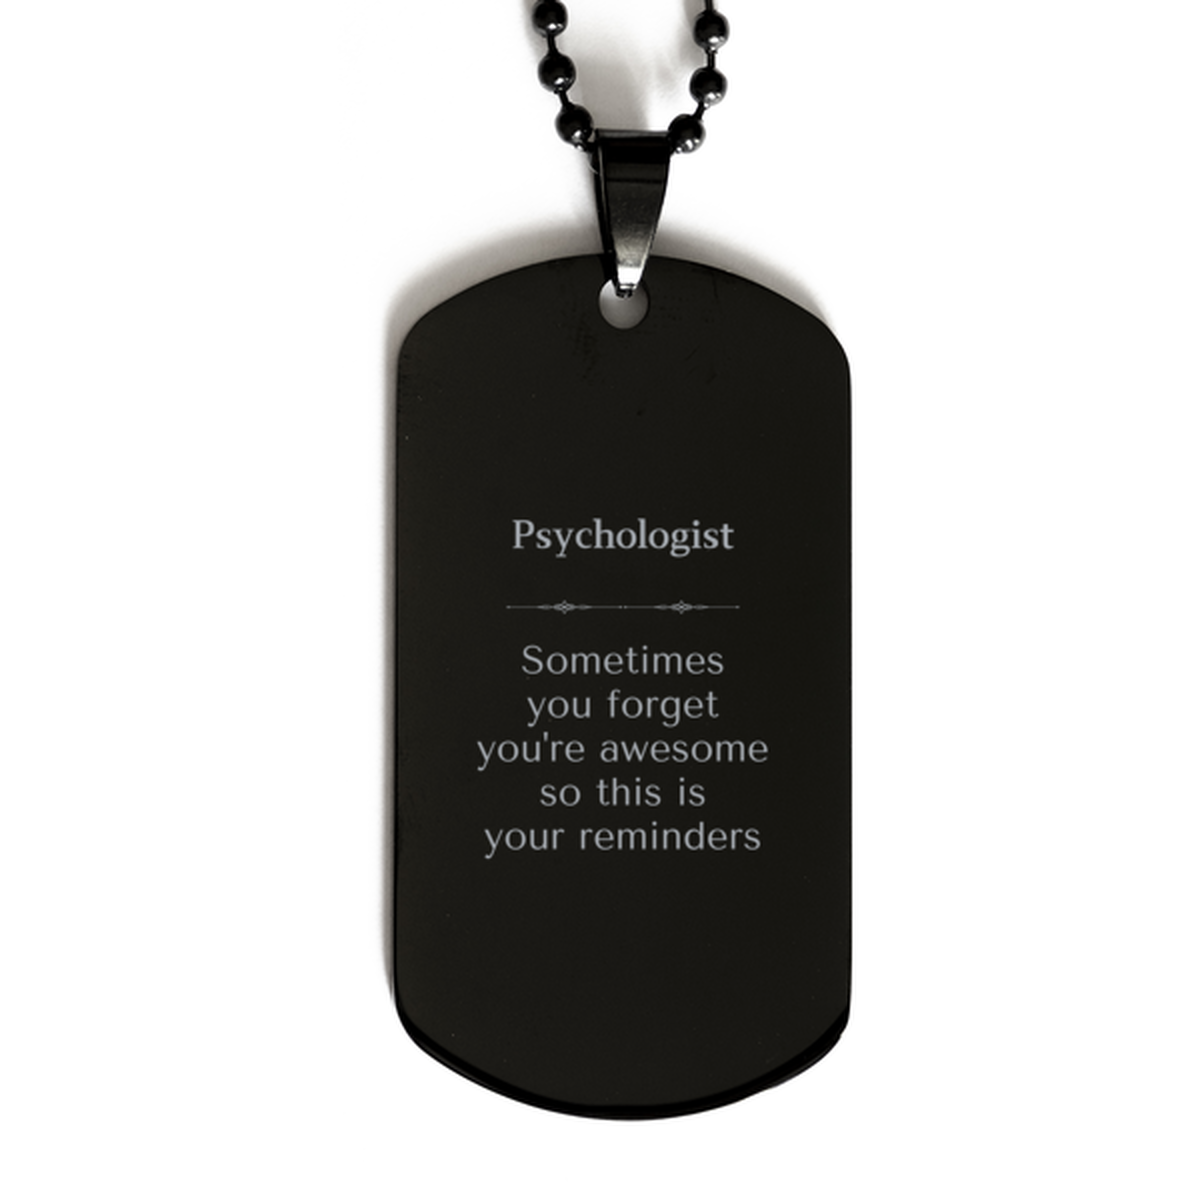 Sentimental Psychologist Black Dog Tag, Psychologist Sometimes you forget you're awesome so this is your reminders, Graduation Christmas Birthday Gifts for Psychologist, Men, Women, Coworkers